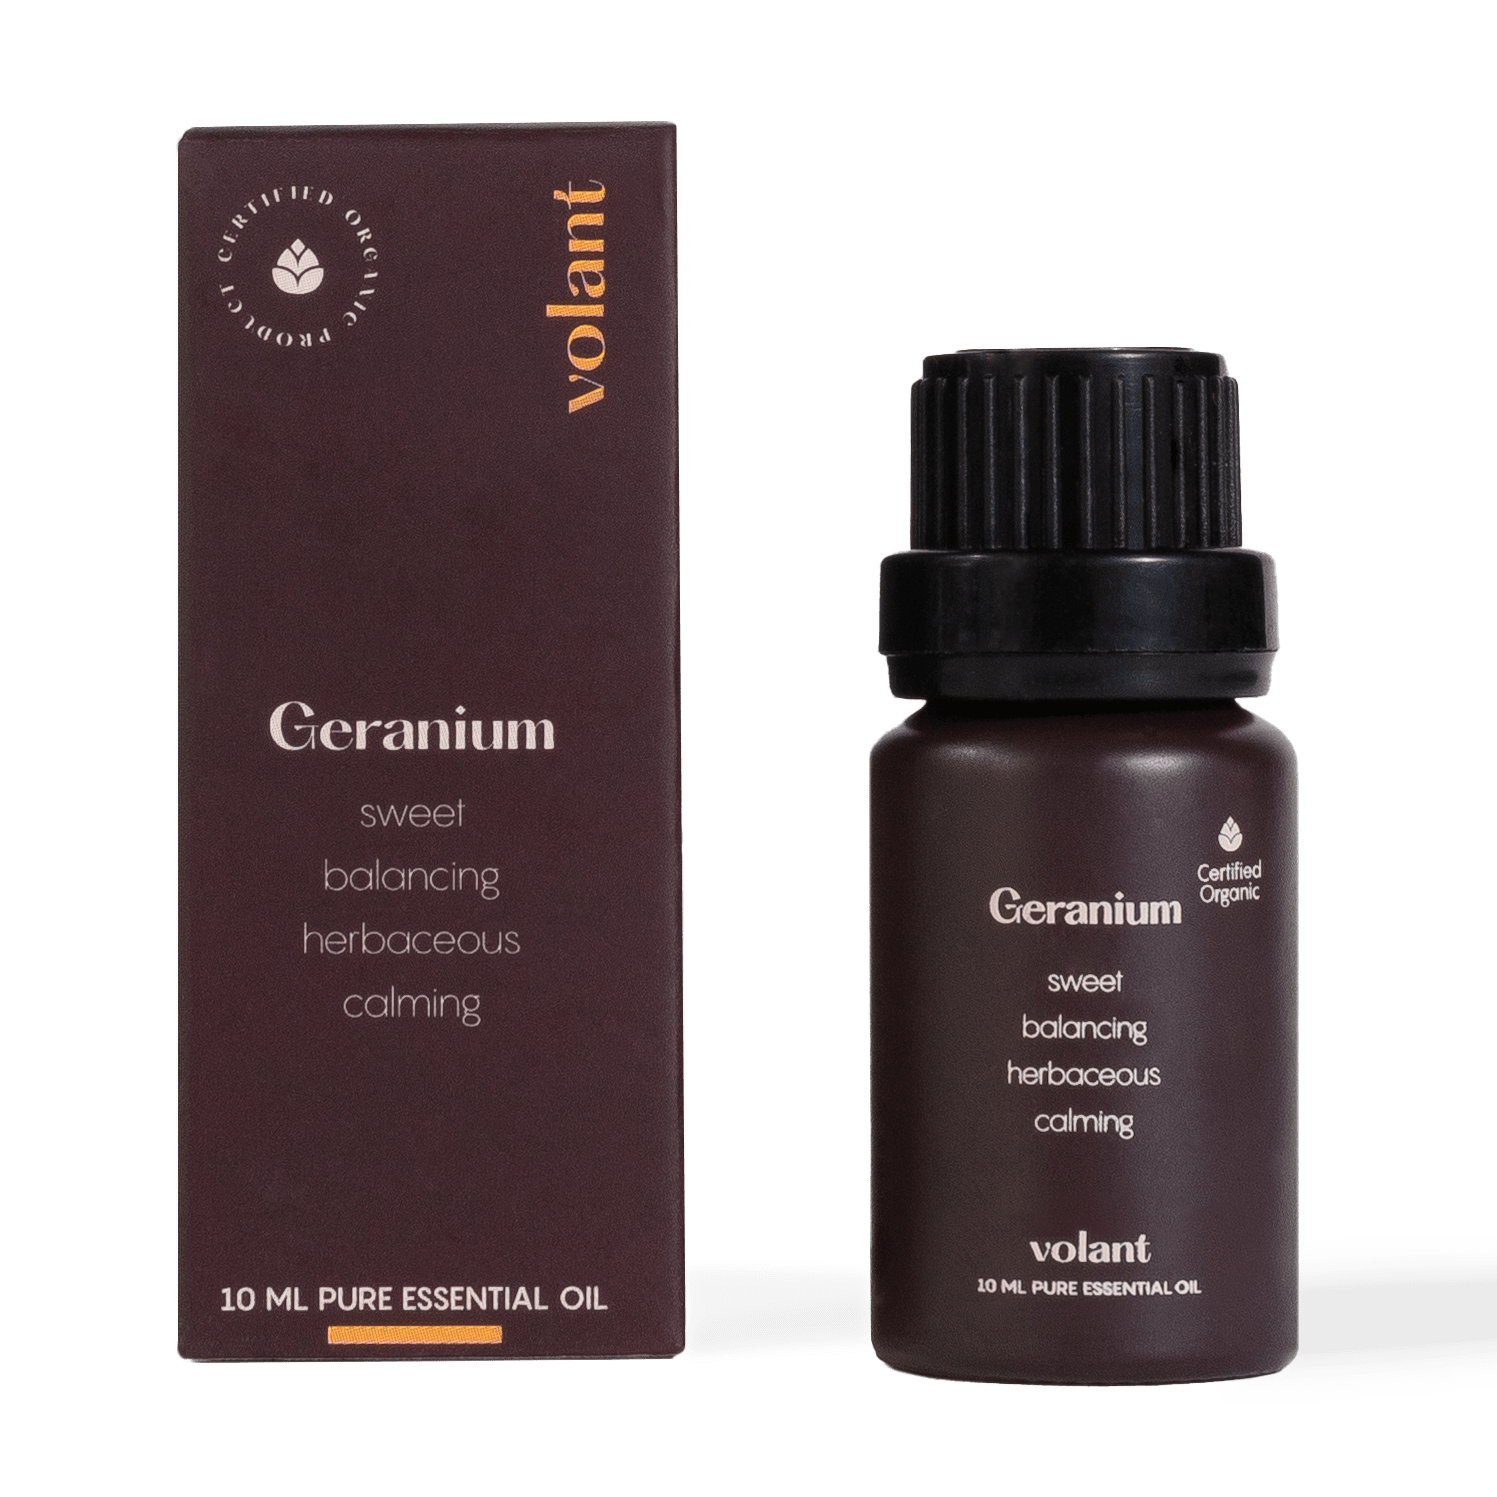 volant organic geranium essential oil bottle packaging for relaxation and hair growth